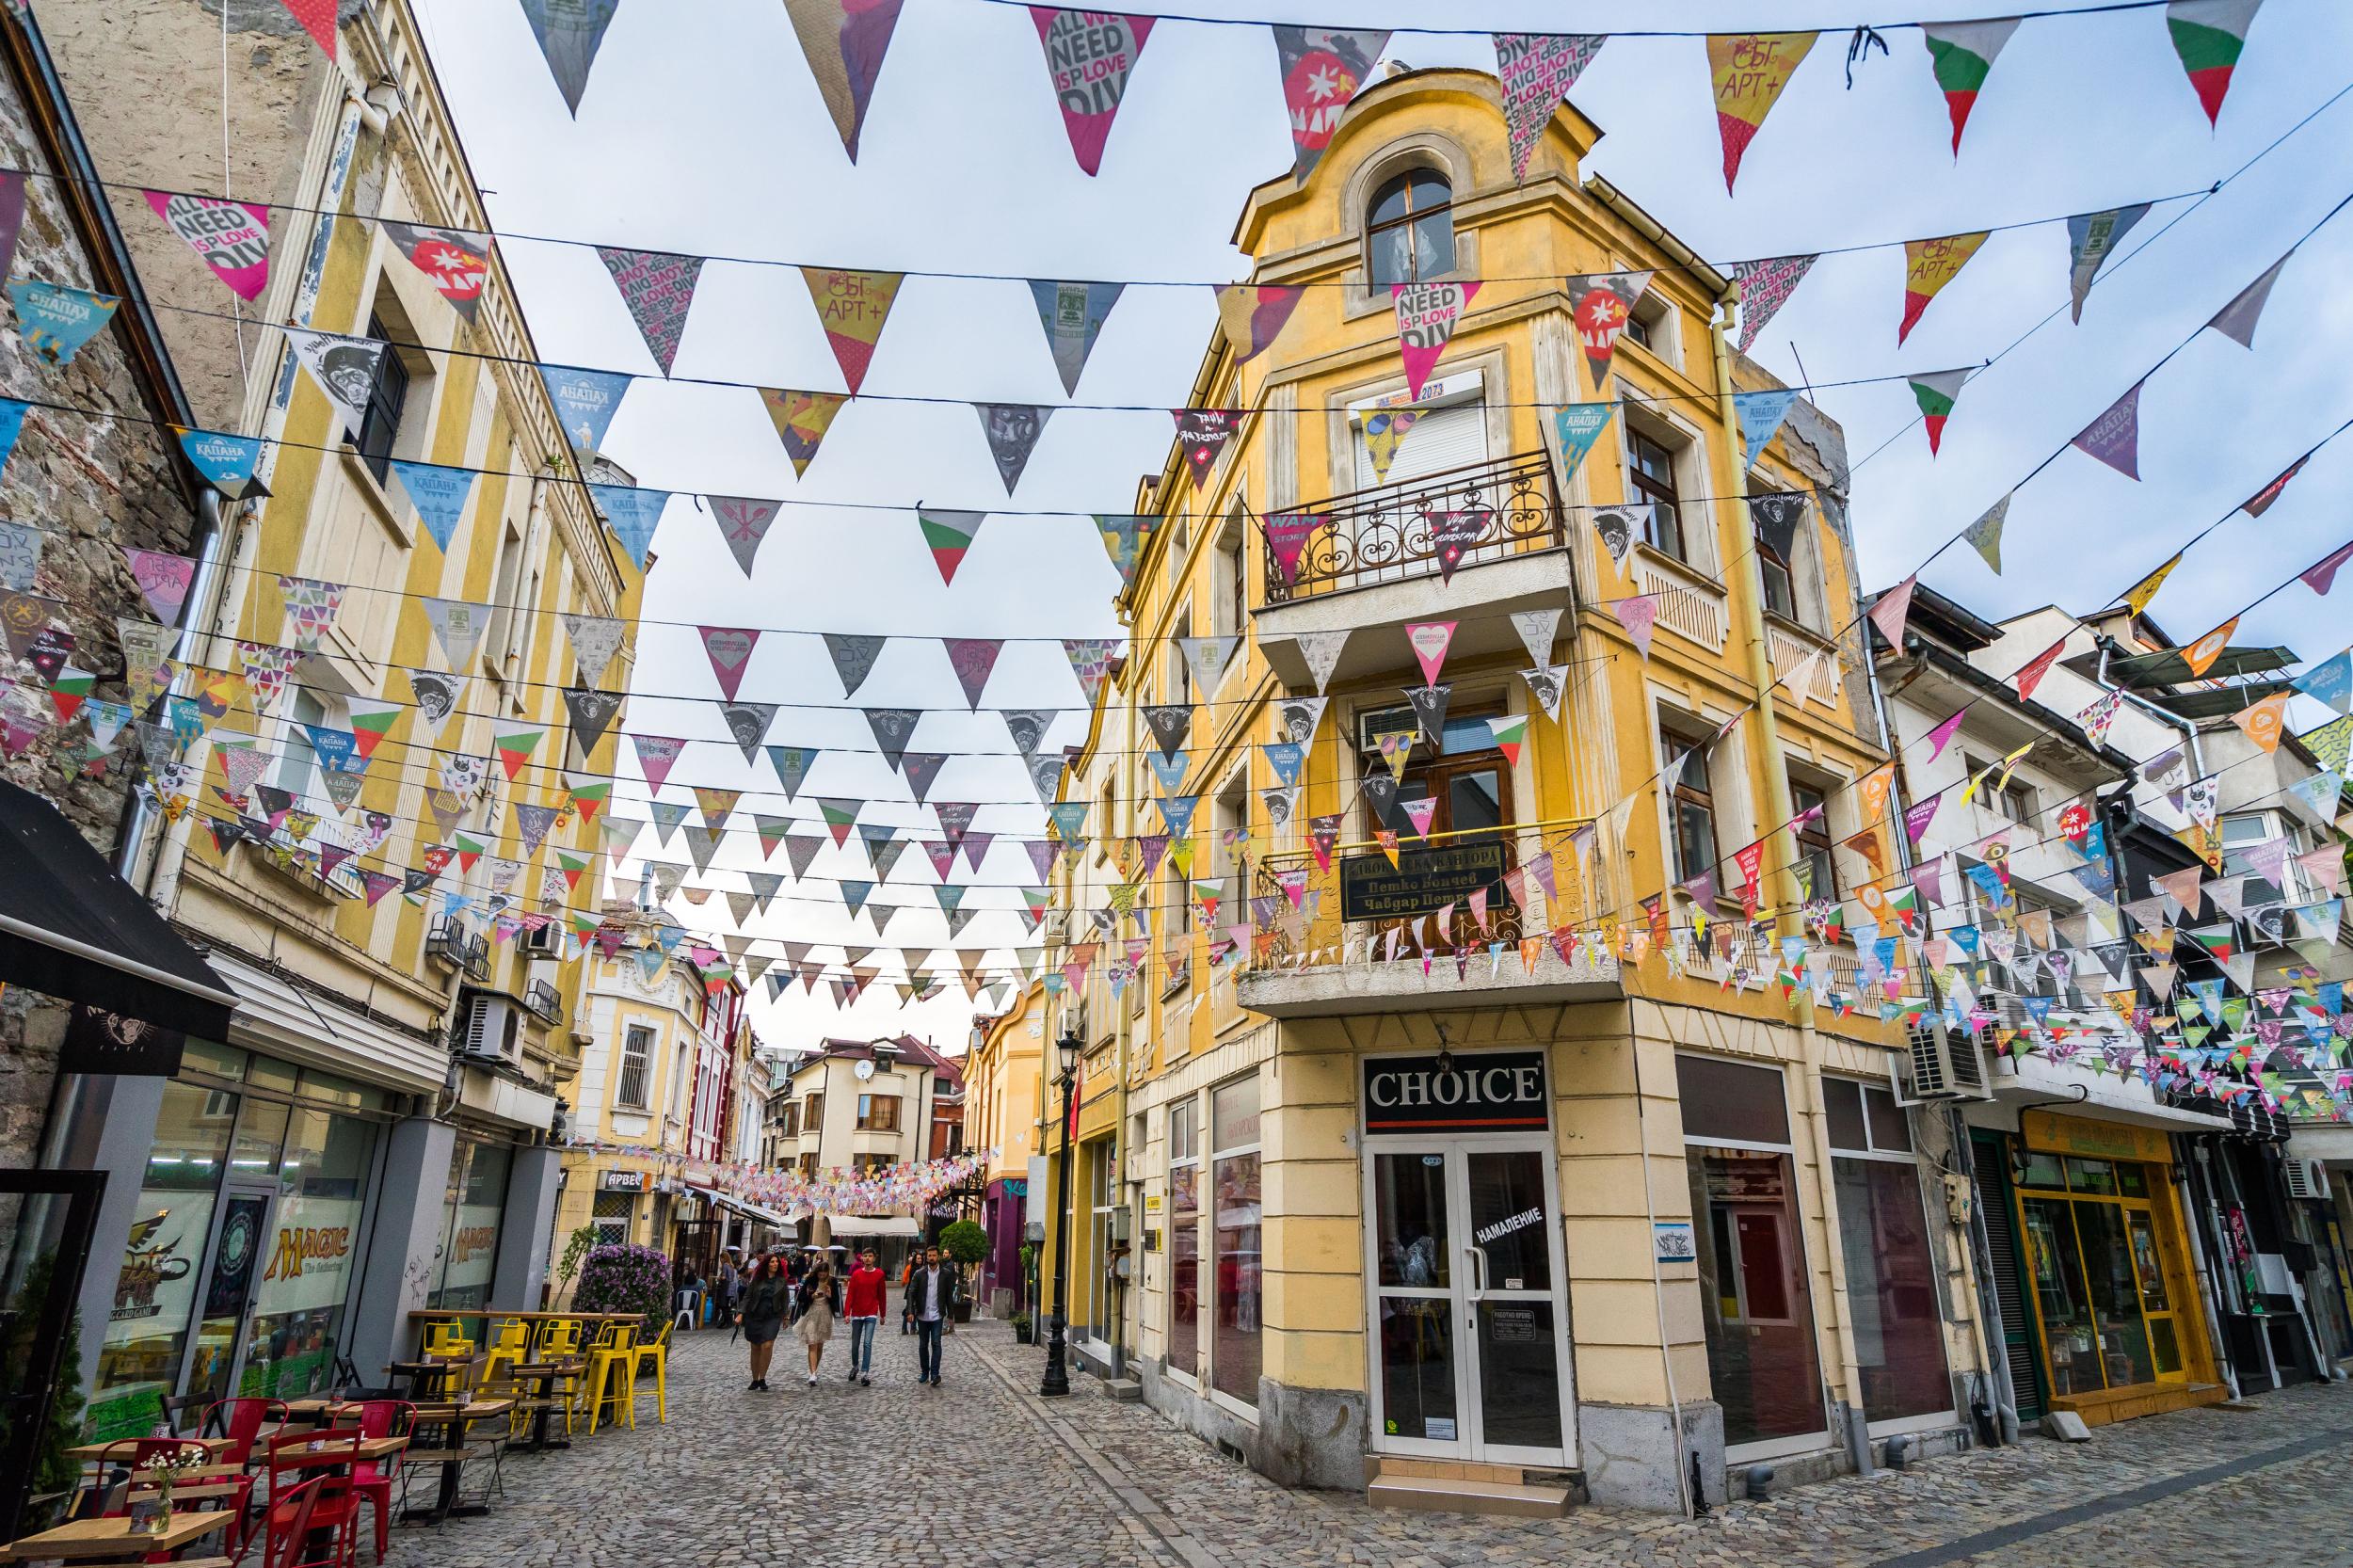 Eat and drink in Plovdiv's hip and arty Kapana district (iStock)